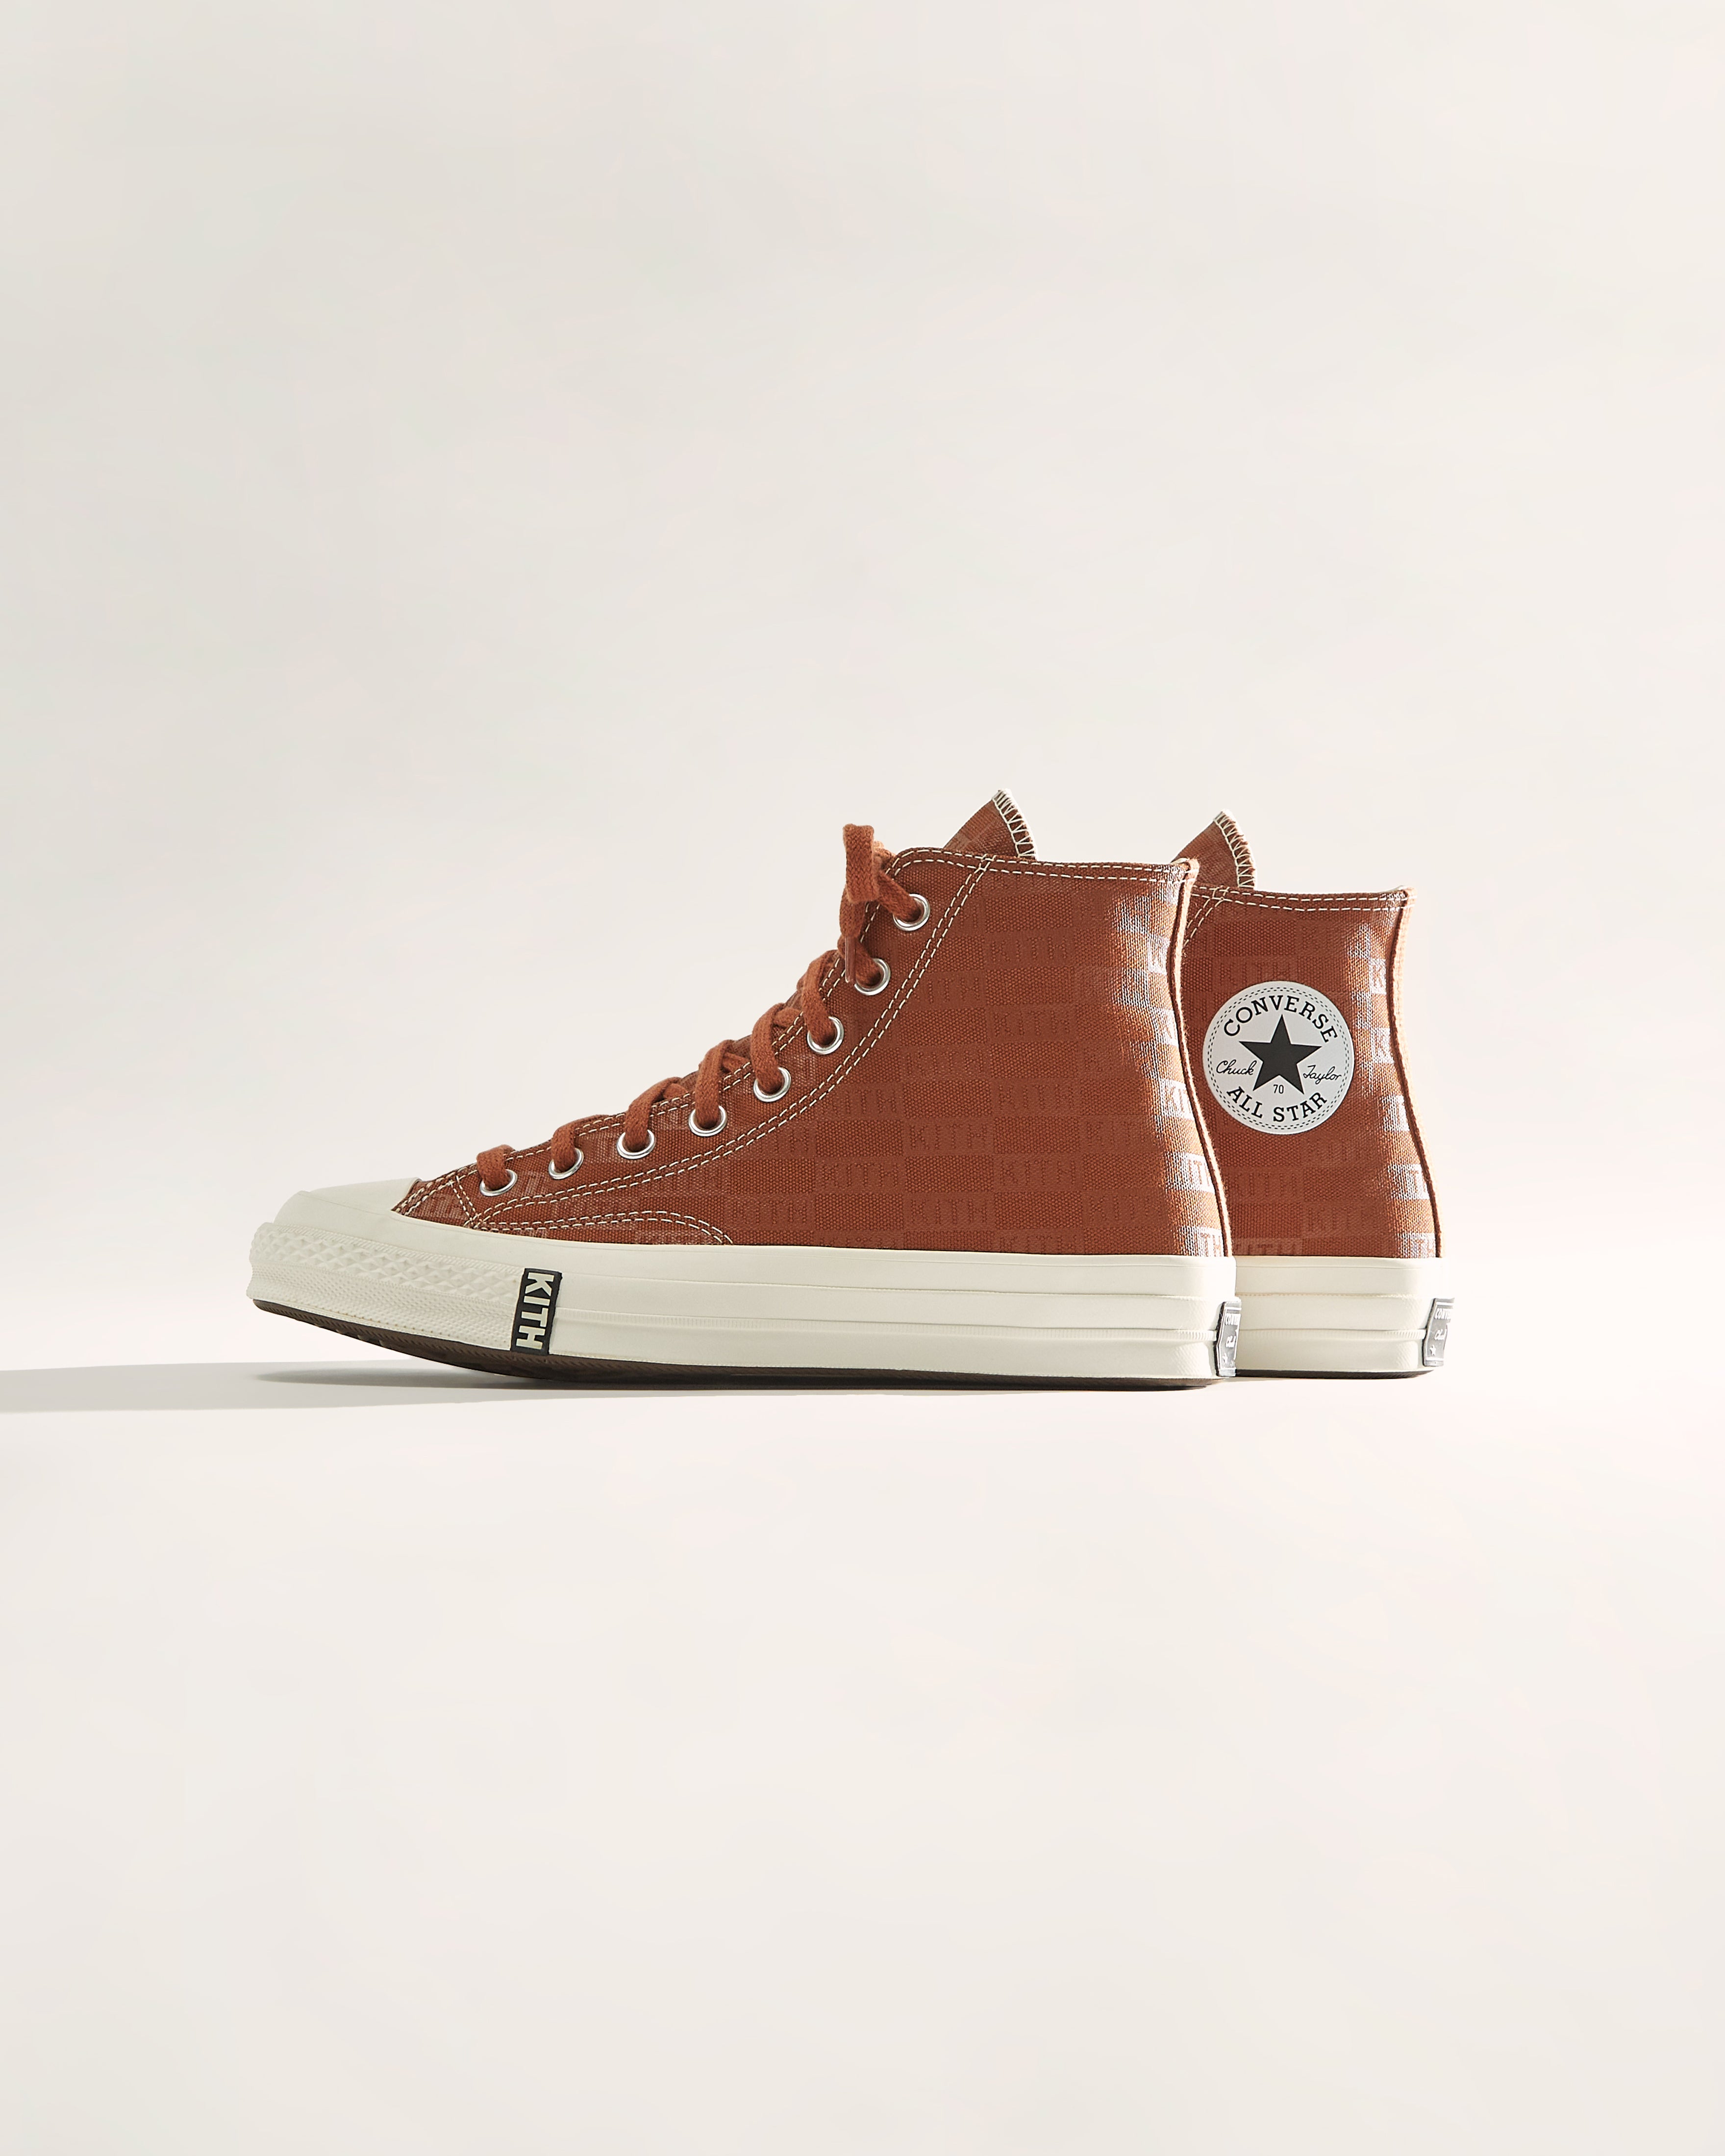 Converse brings us a wild rendition of the classic Chuck Taylor 70